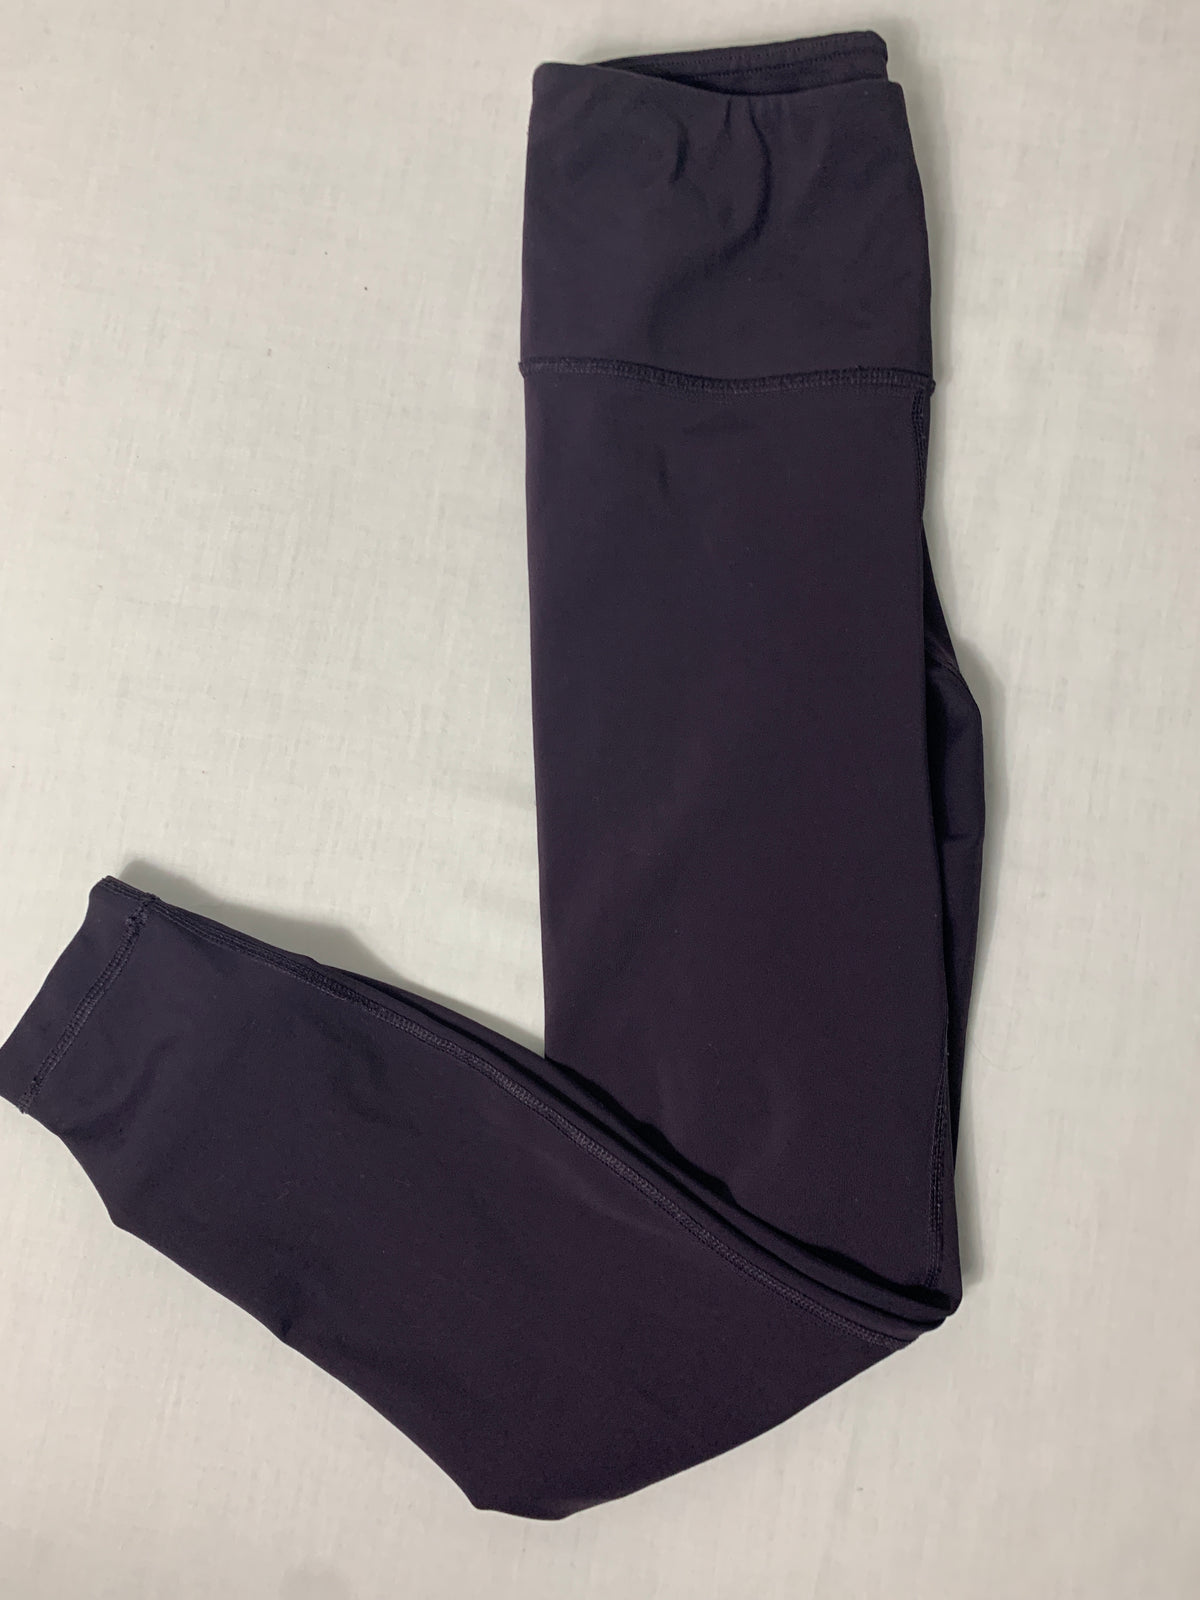 90 Degree By Reflex Active Pants Size Large